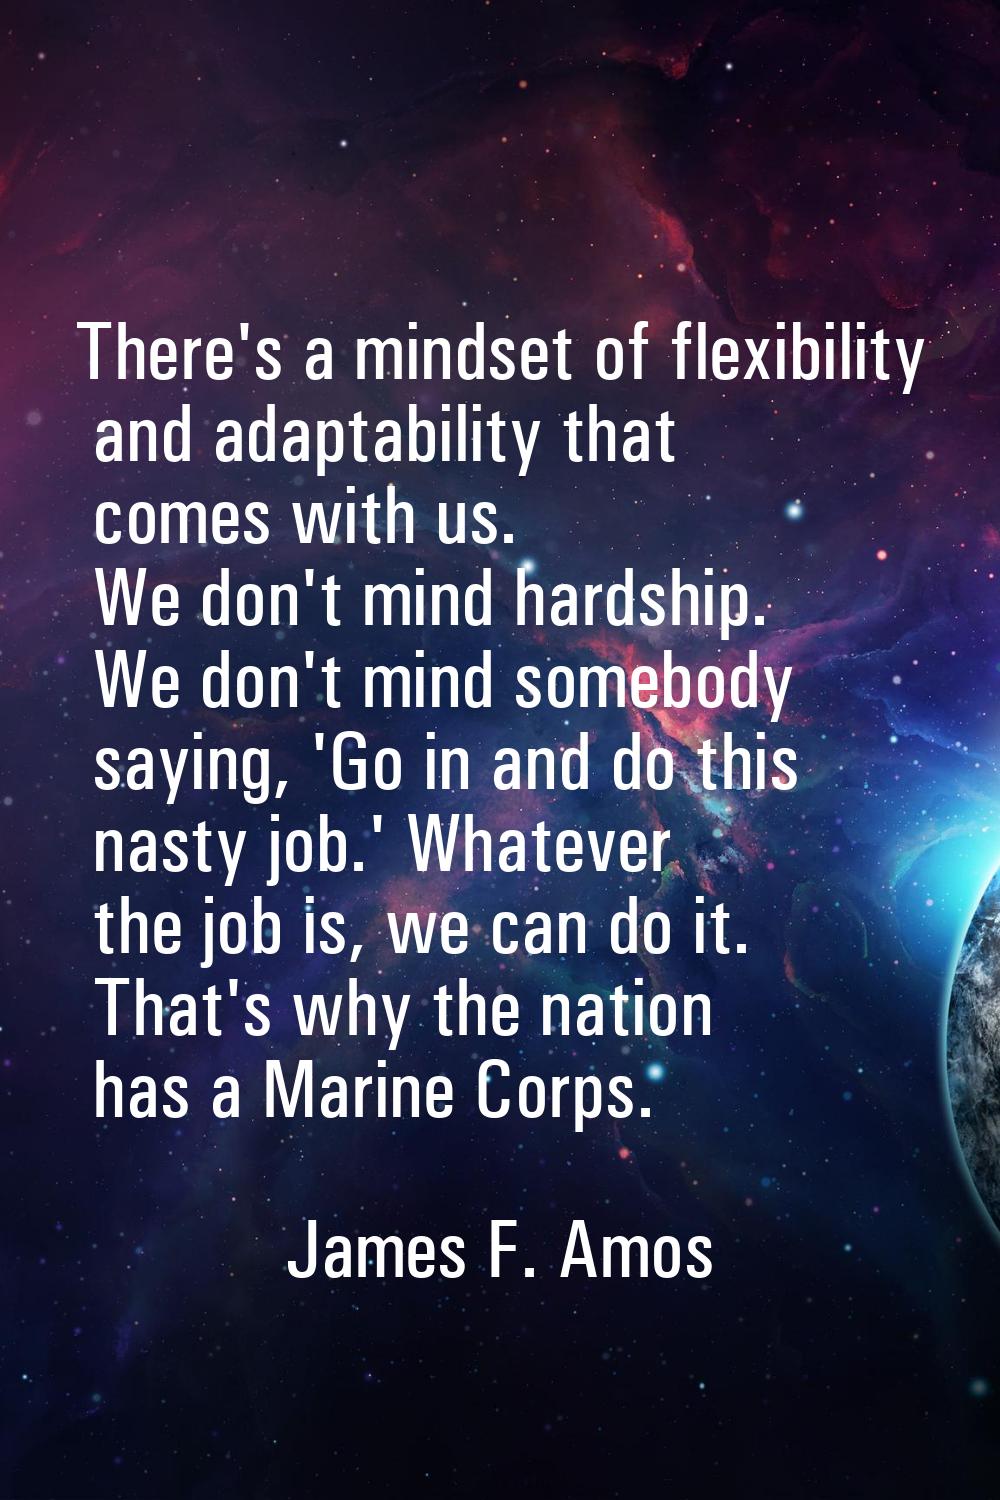 There's a mindset of flexibility and adaptability that comes with us. We don't mind hardship. We do